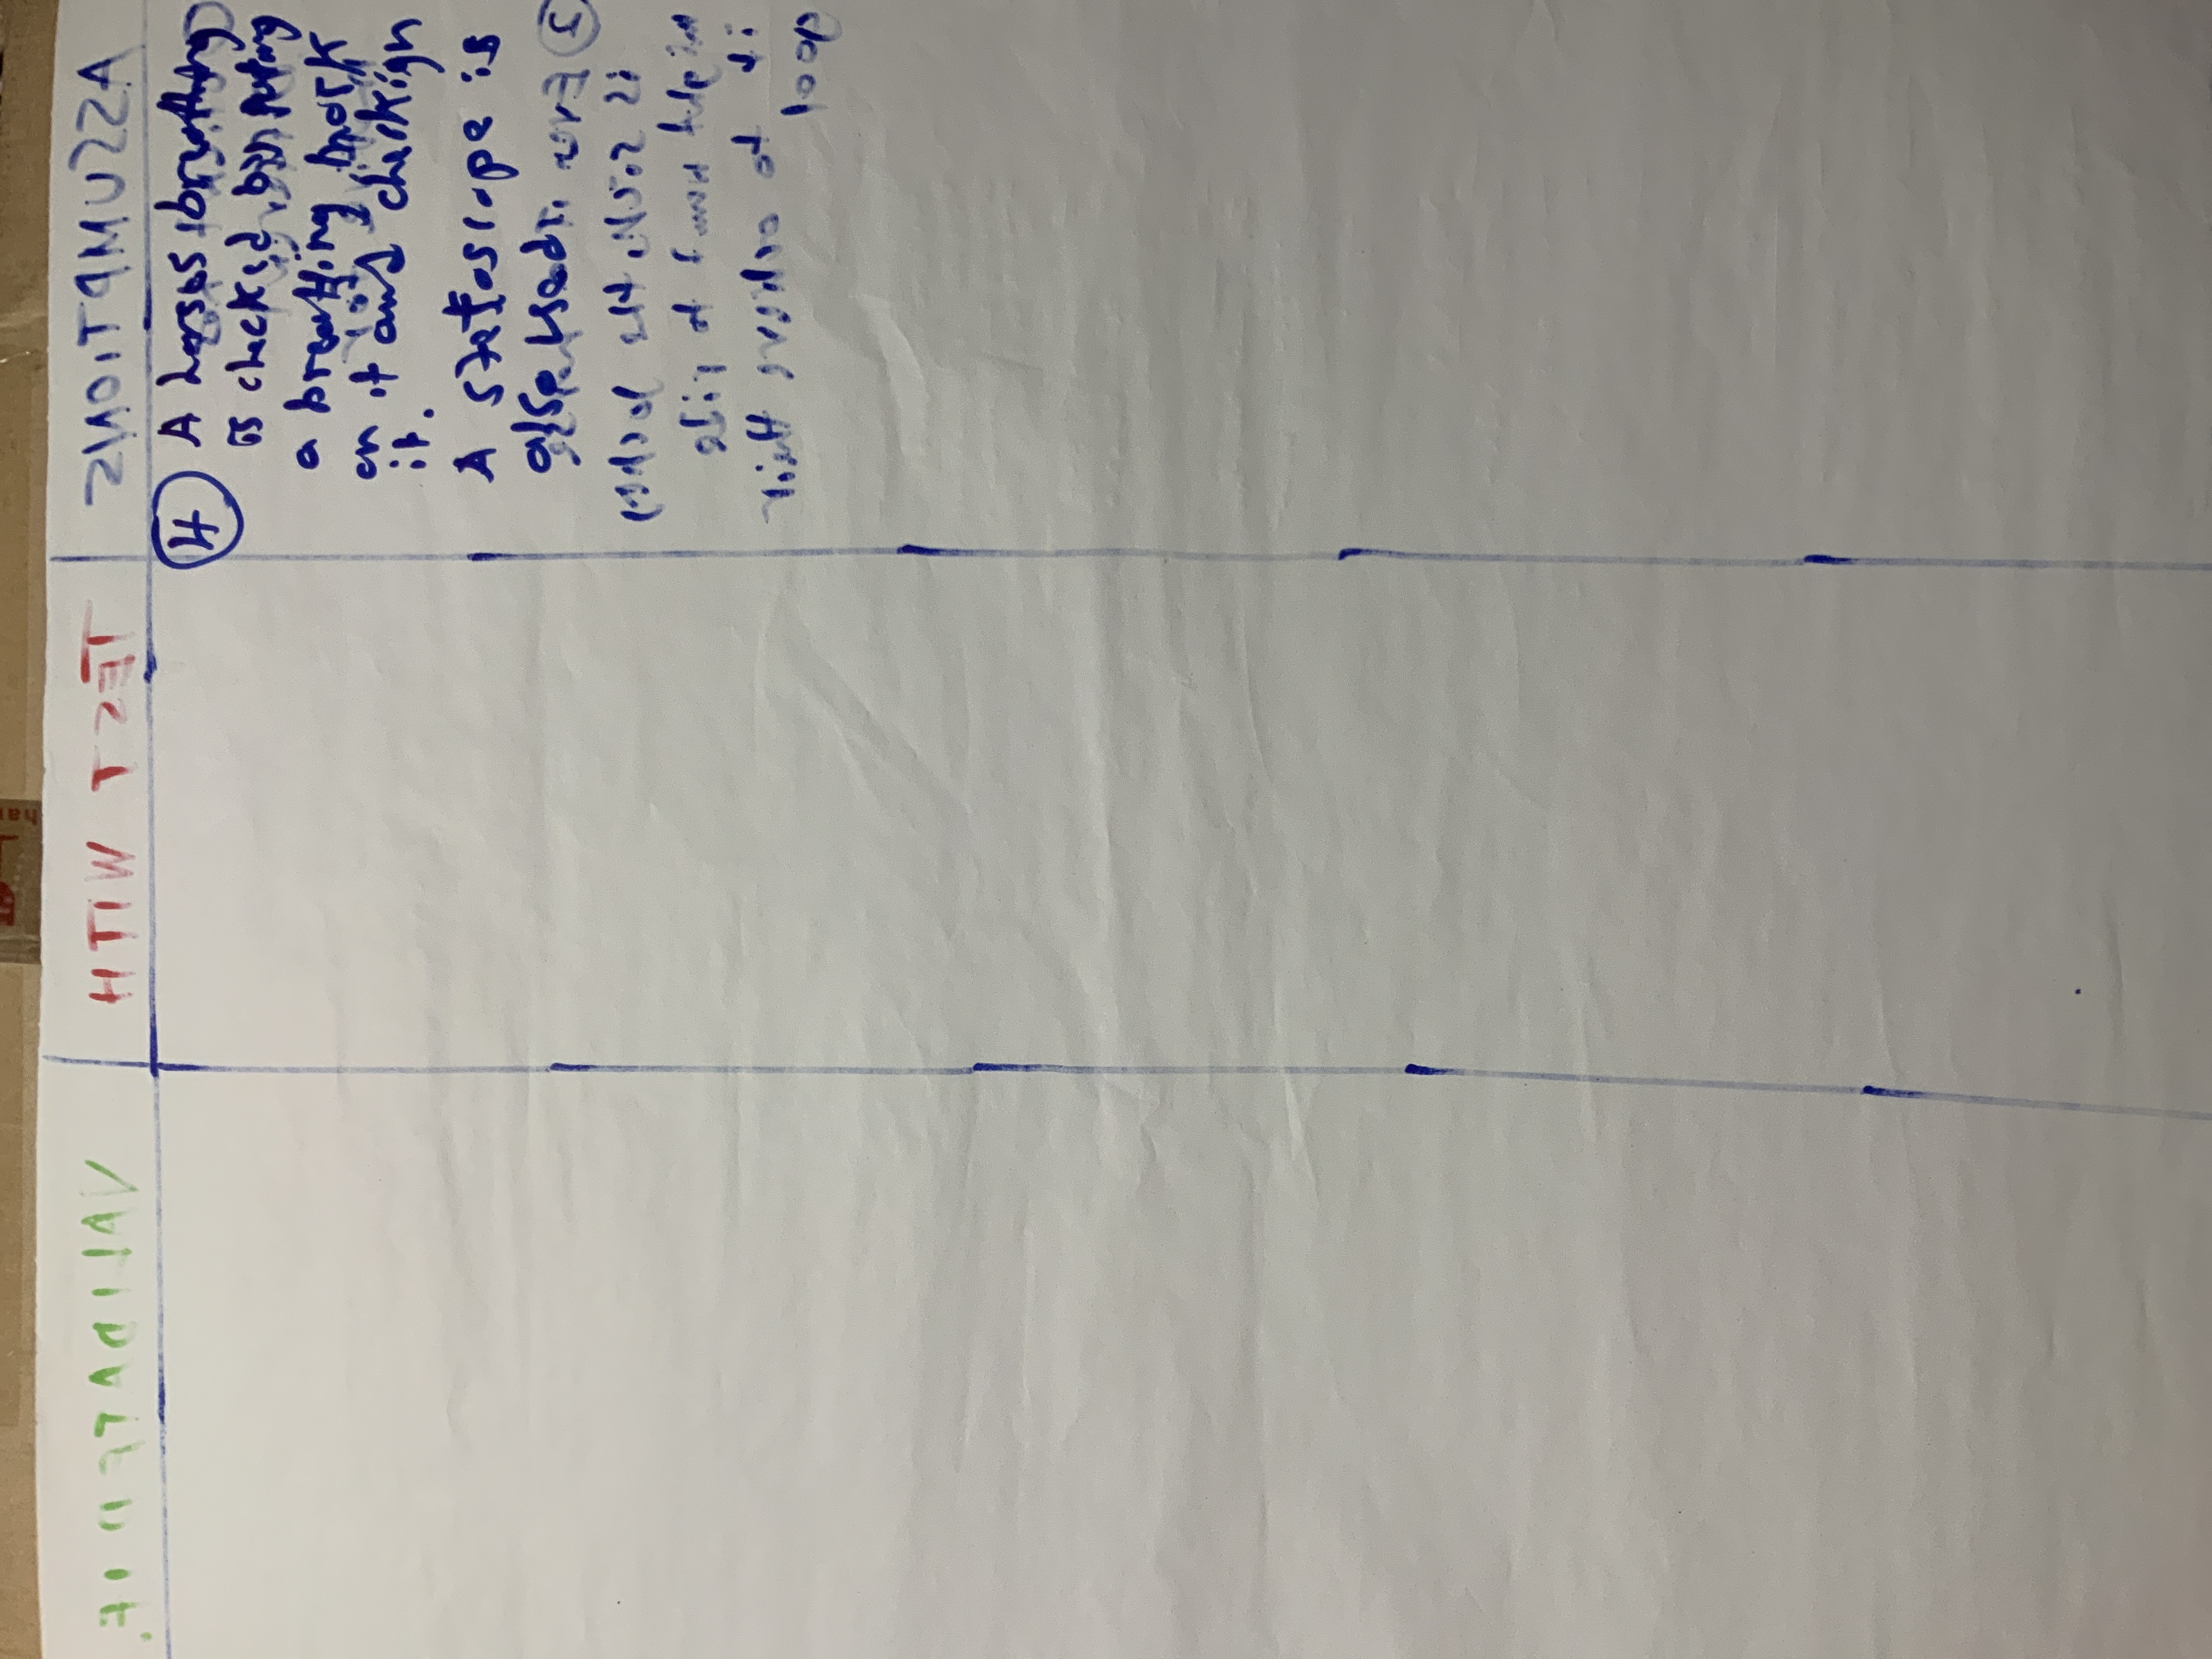 Abdul's portolio project tittled: N9, a Fitbit for Horses. image of  assumptions typed on paper.